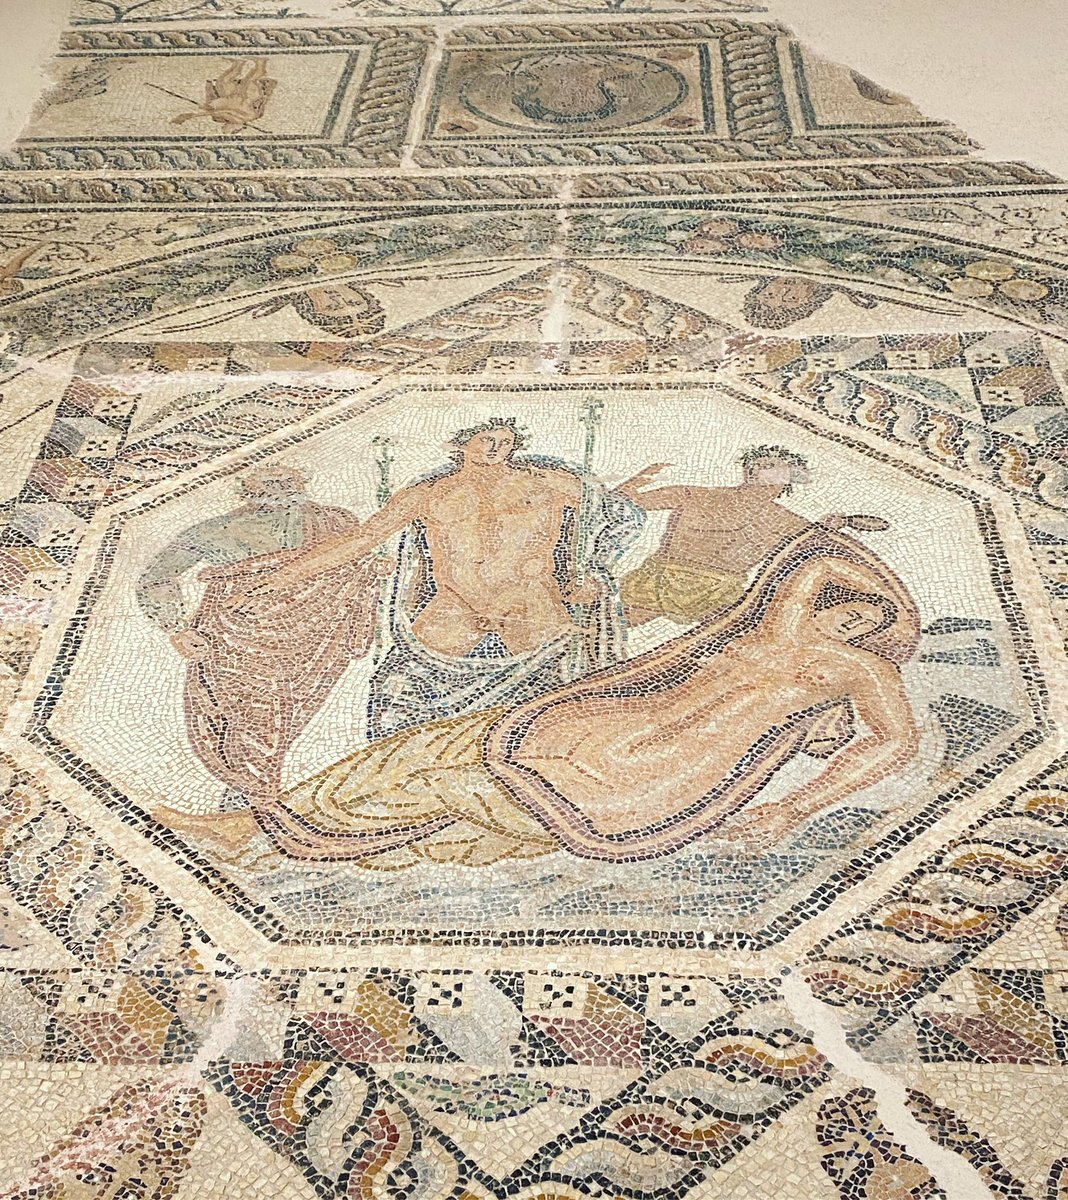 Mosaics of the “House of Dionysus” Chania (Kydonia). 3rd century CE In the centre of the room, in an octagonal emblem, is the legend of Dionysus discovering Ariadne on Naxos, together with two members of his retinue. #mosaicmonday